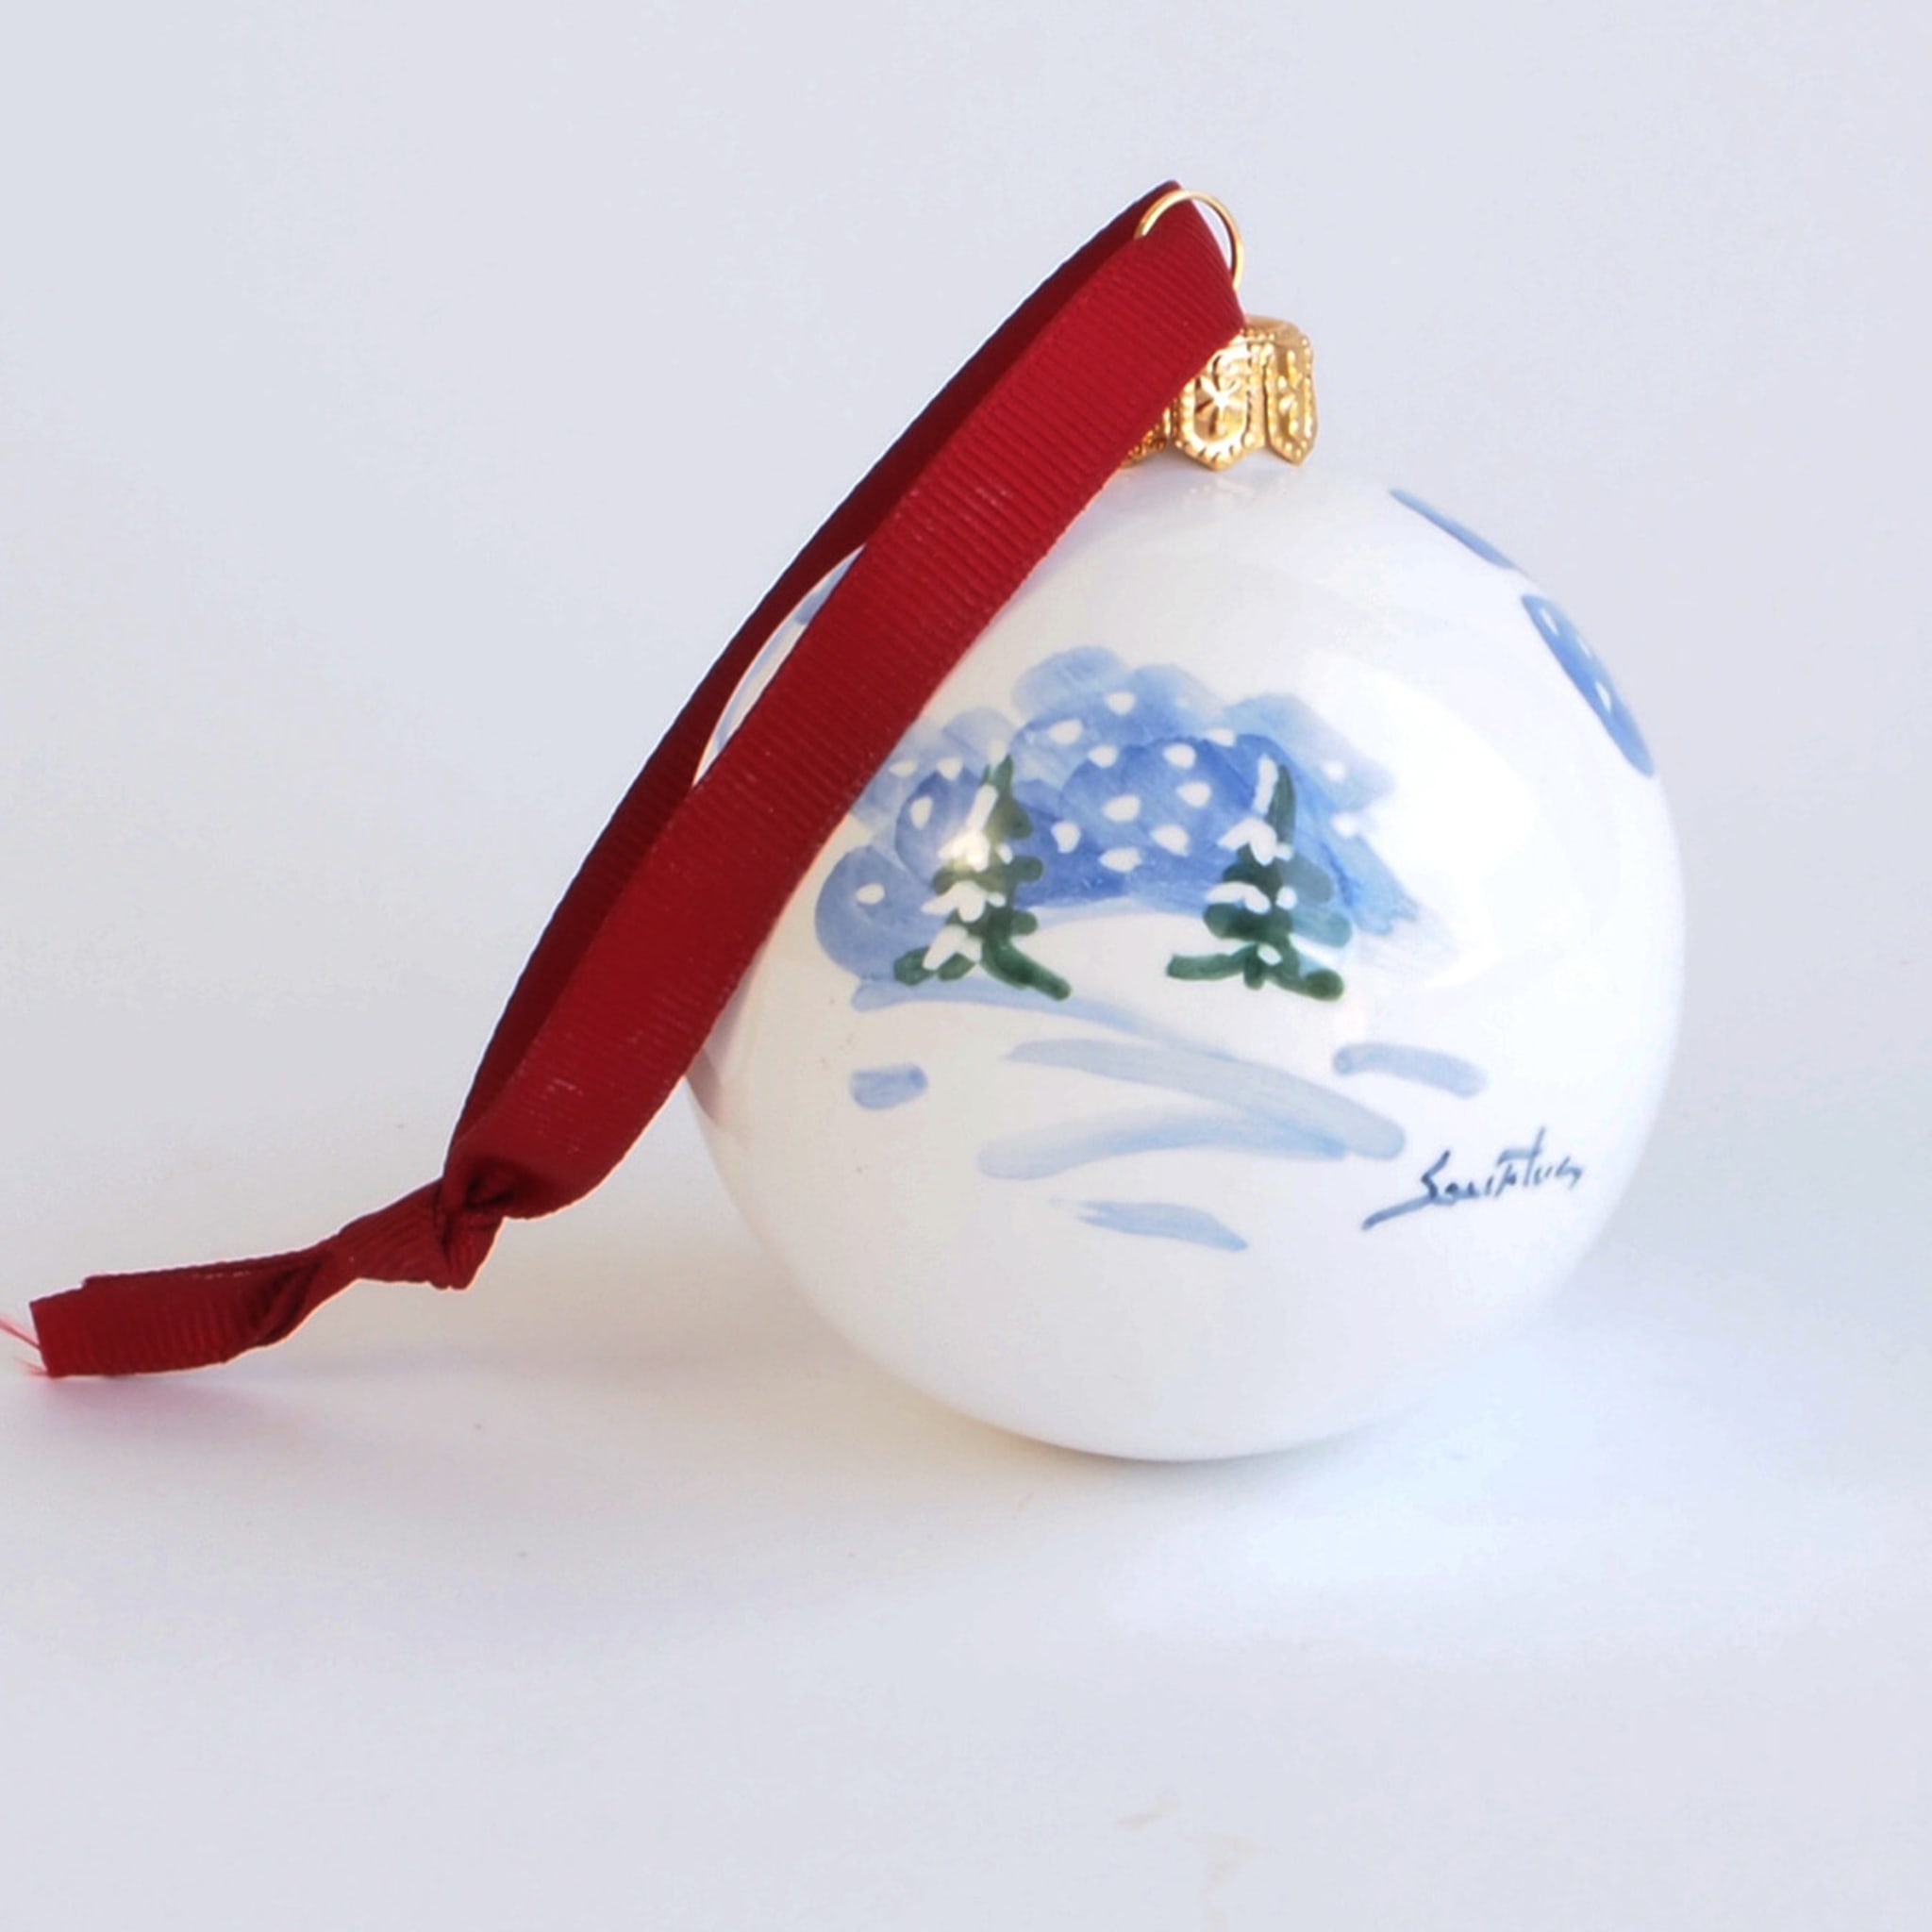 Pink Winter Christmas Ball Ornament with Red Ribbon - Alternative view 1